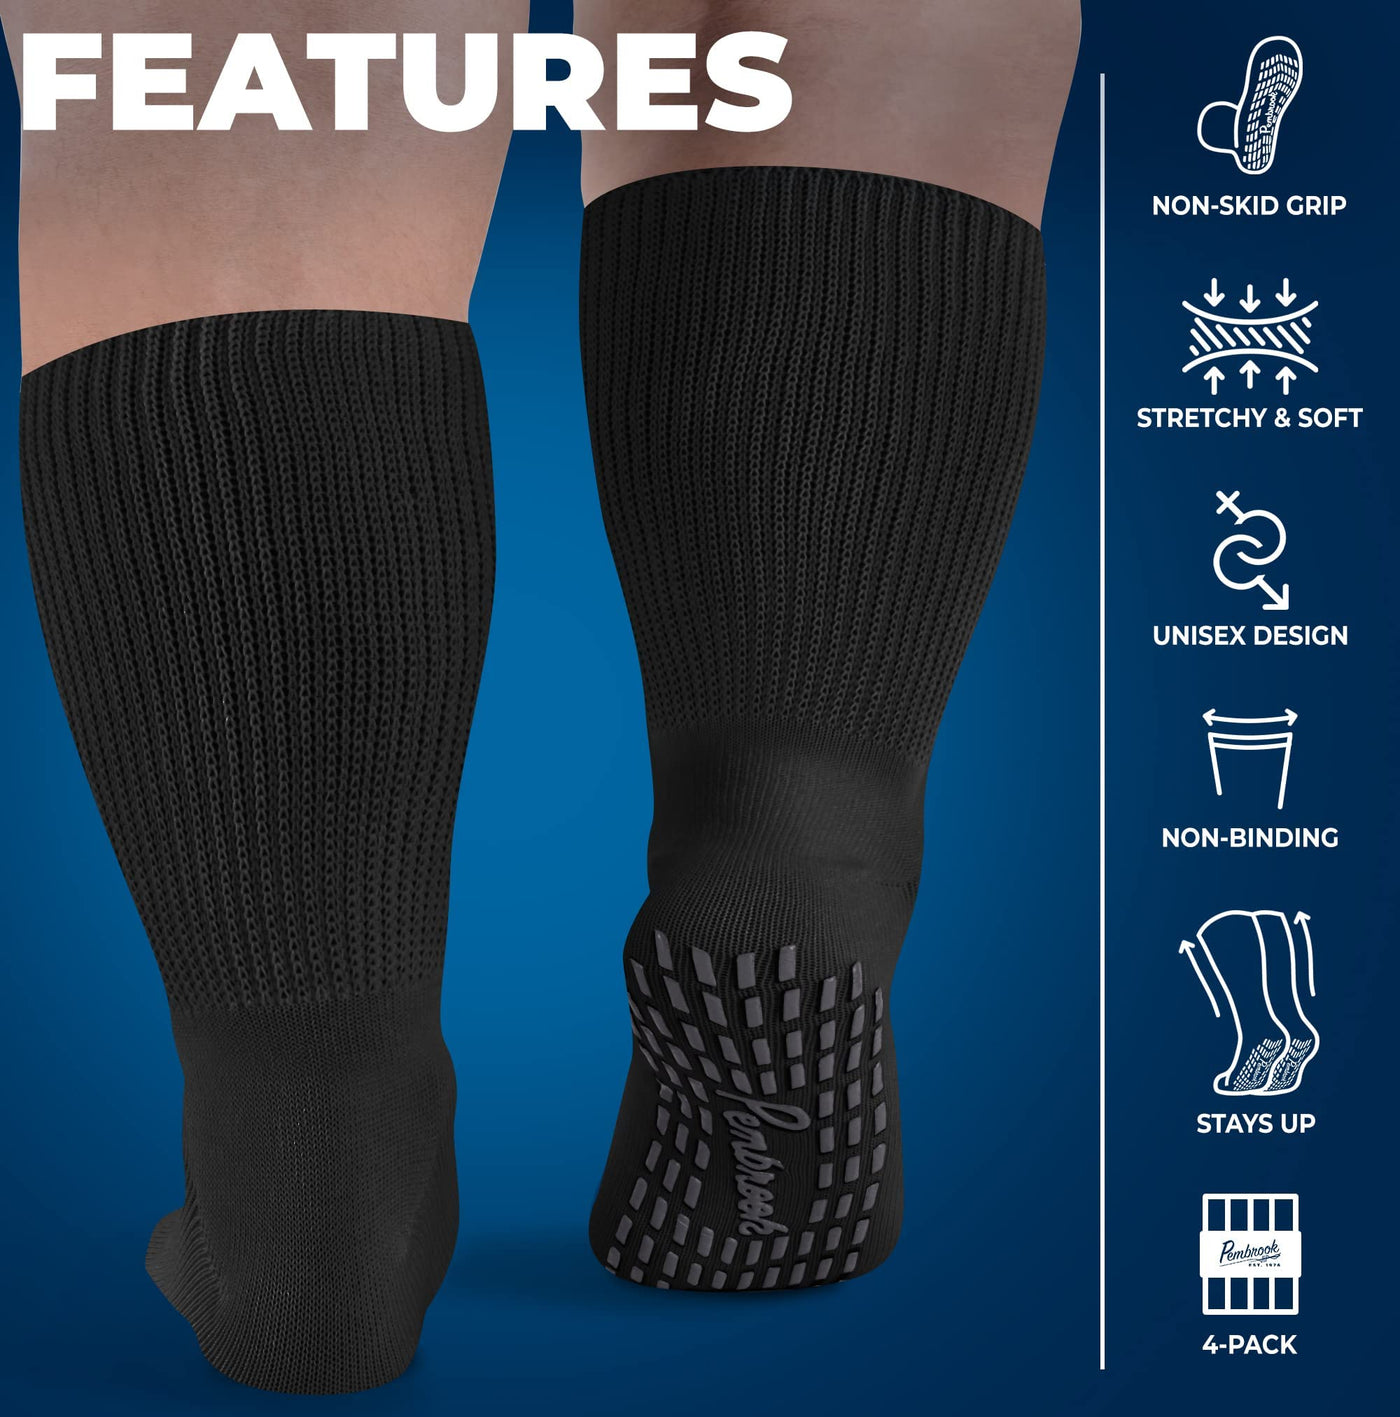 Pembrook Extra Wide Socks for Swollen Feet - 4 Pair Bariatric Socks fo